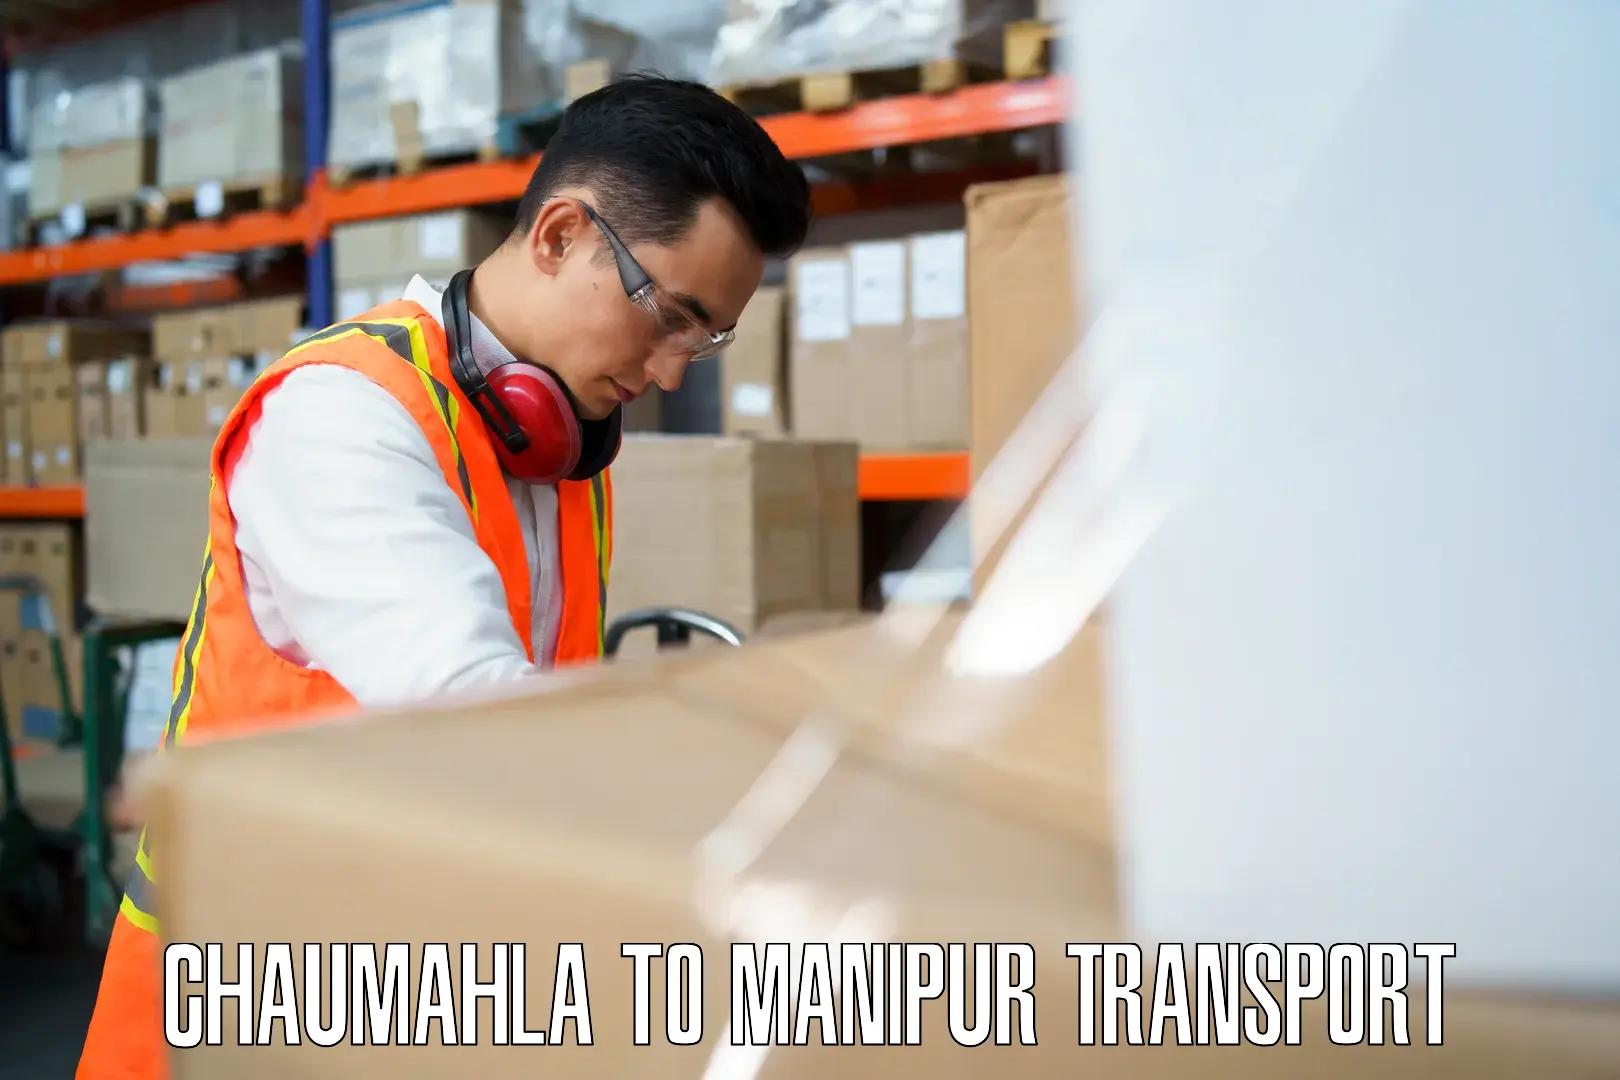 Two wheeler transport services Chaumahla to Manipur